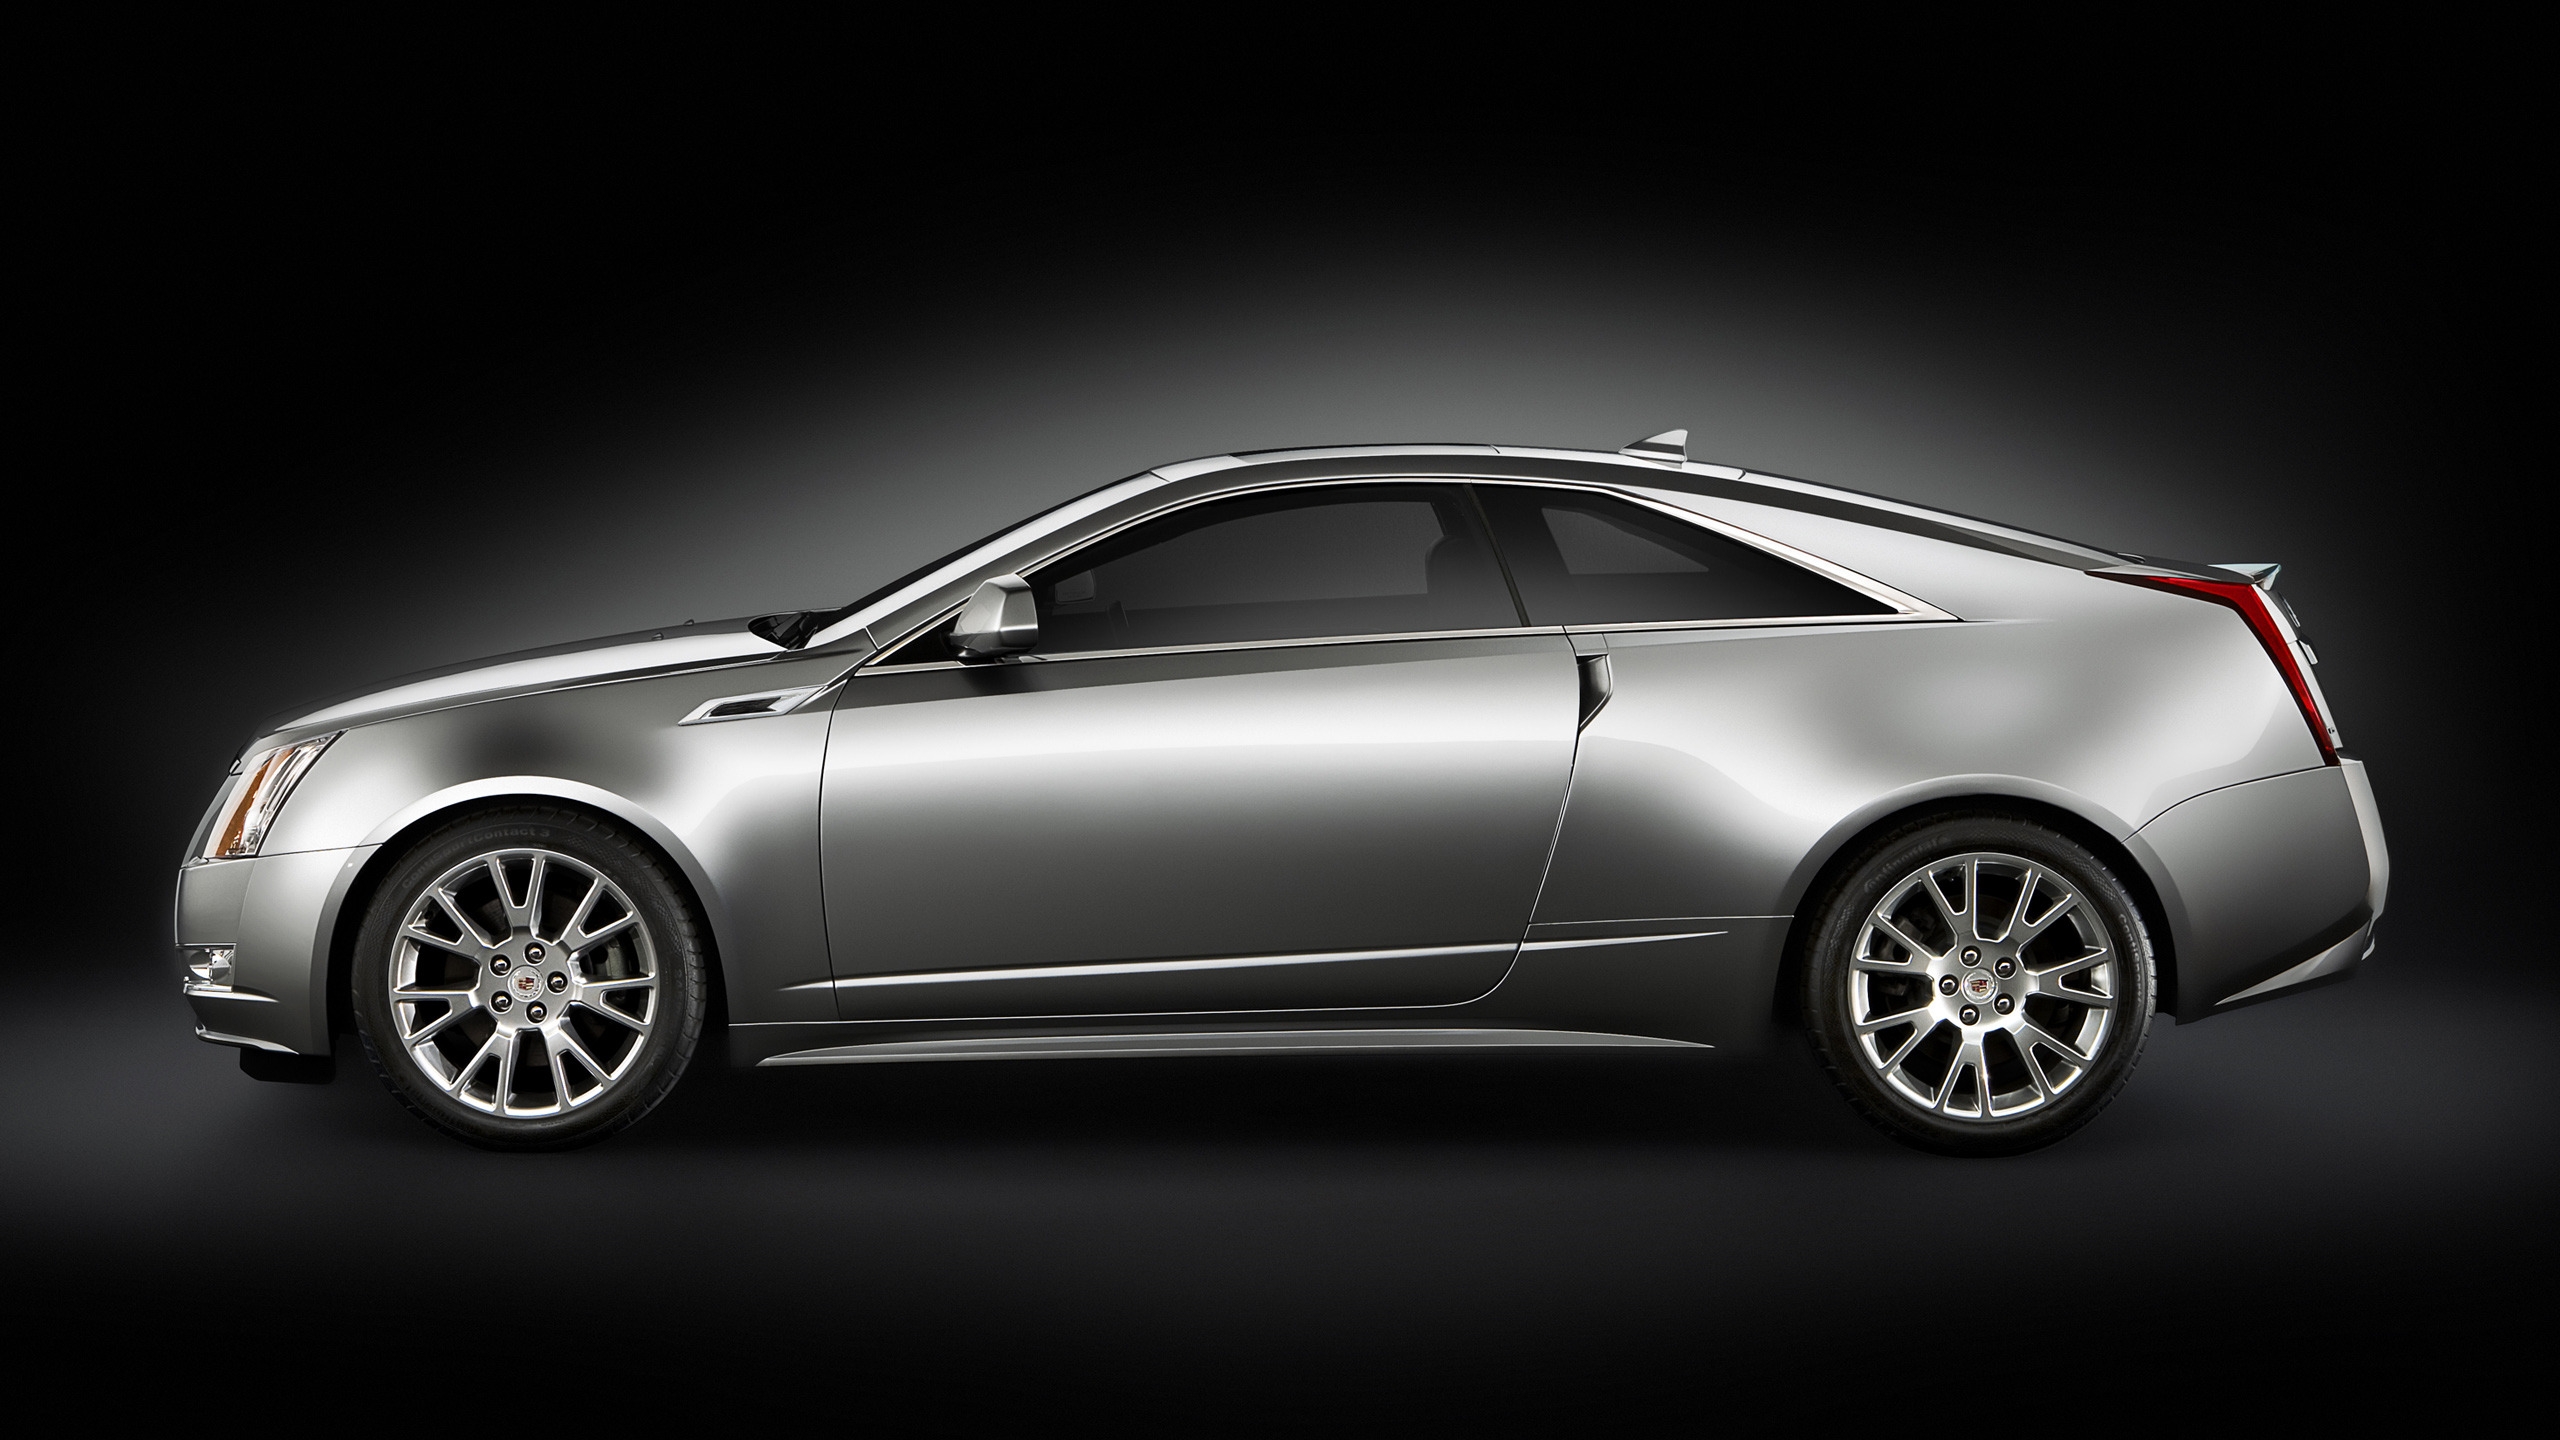 Cadillac CTS Coupe Side for 2560x1440 HDTV resolution